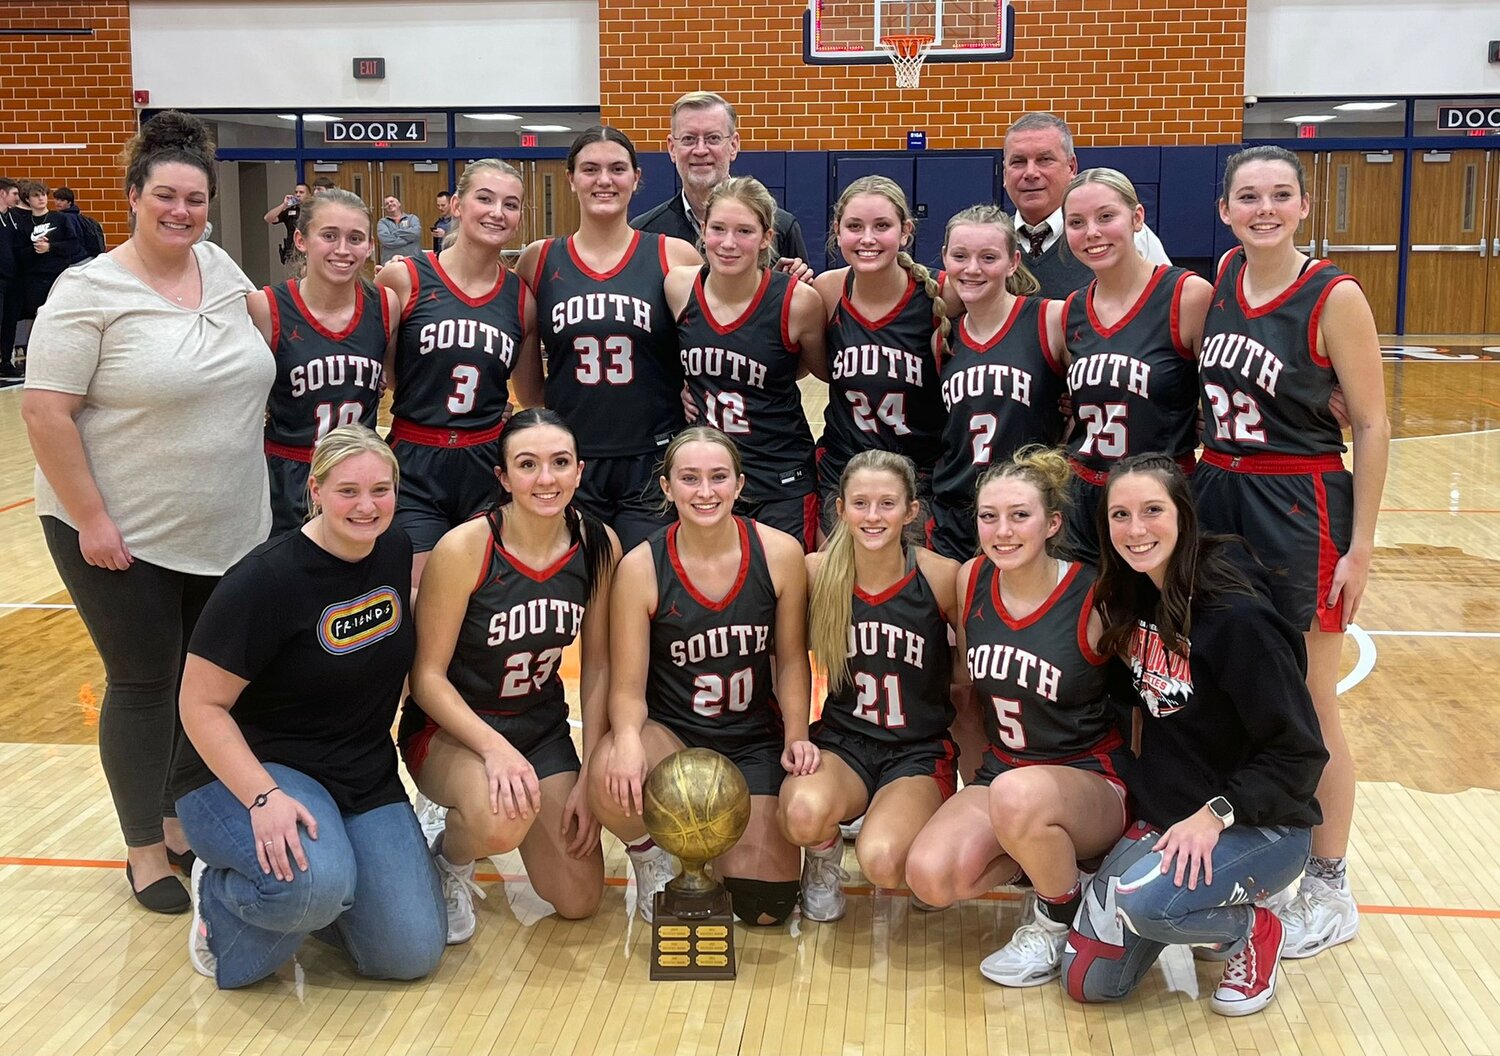 The Southmont girls basketball team captured their 2nd Sugar Creeek Classic title in the last 4 seasons.